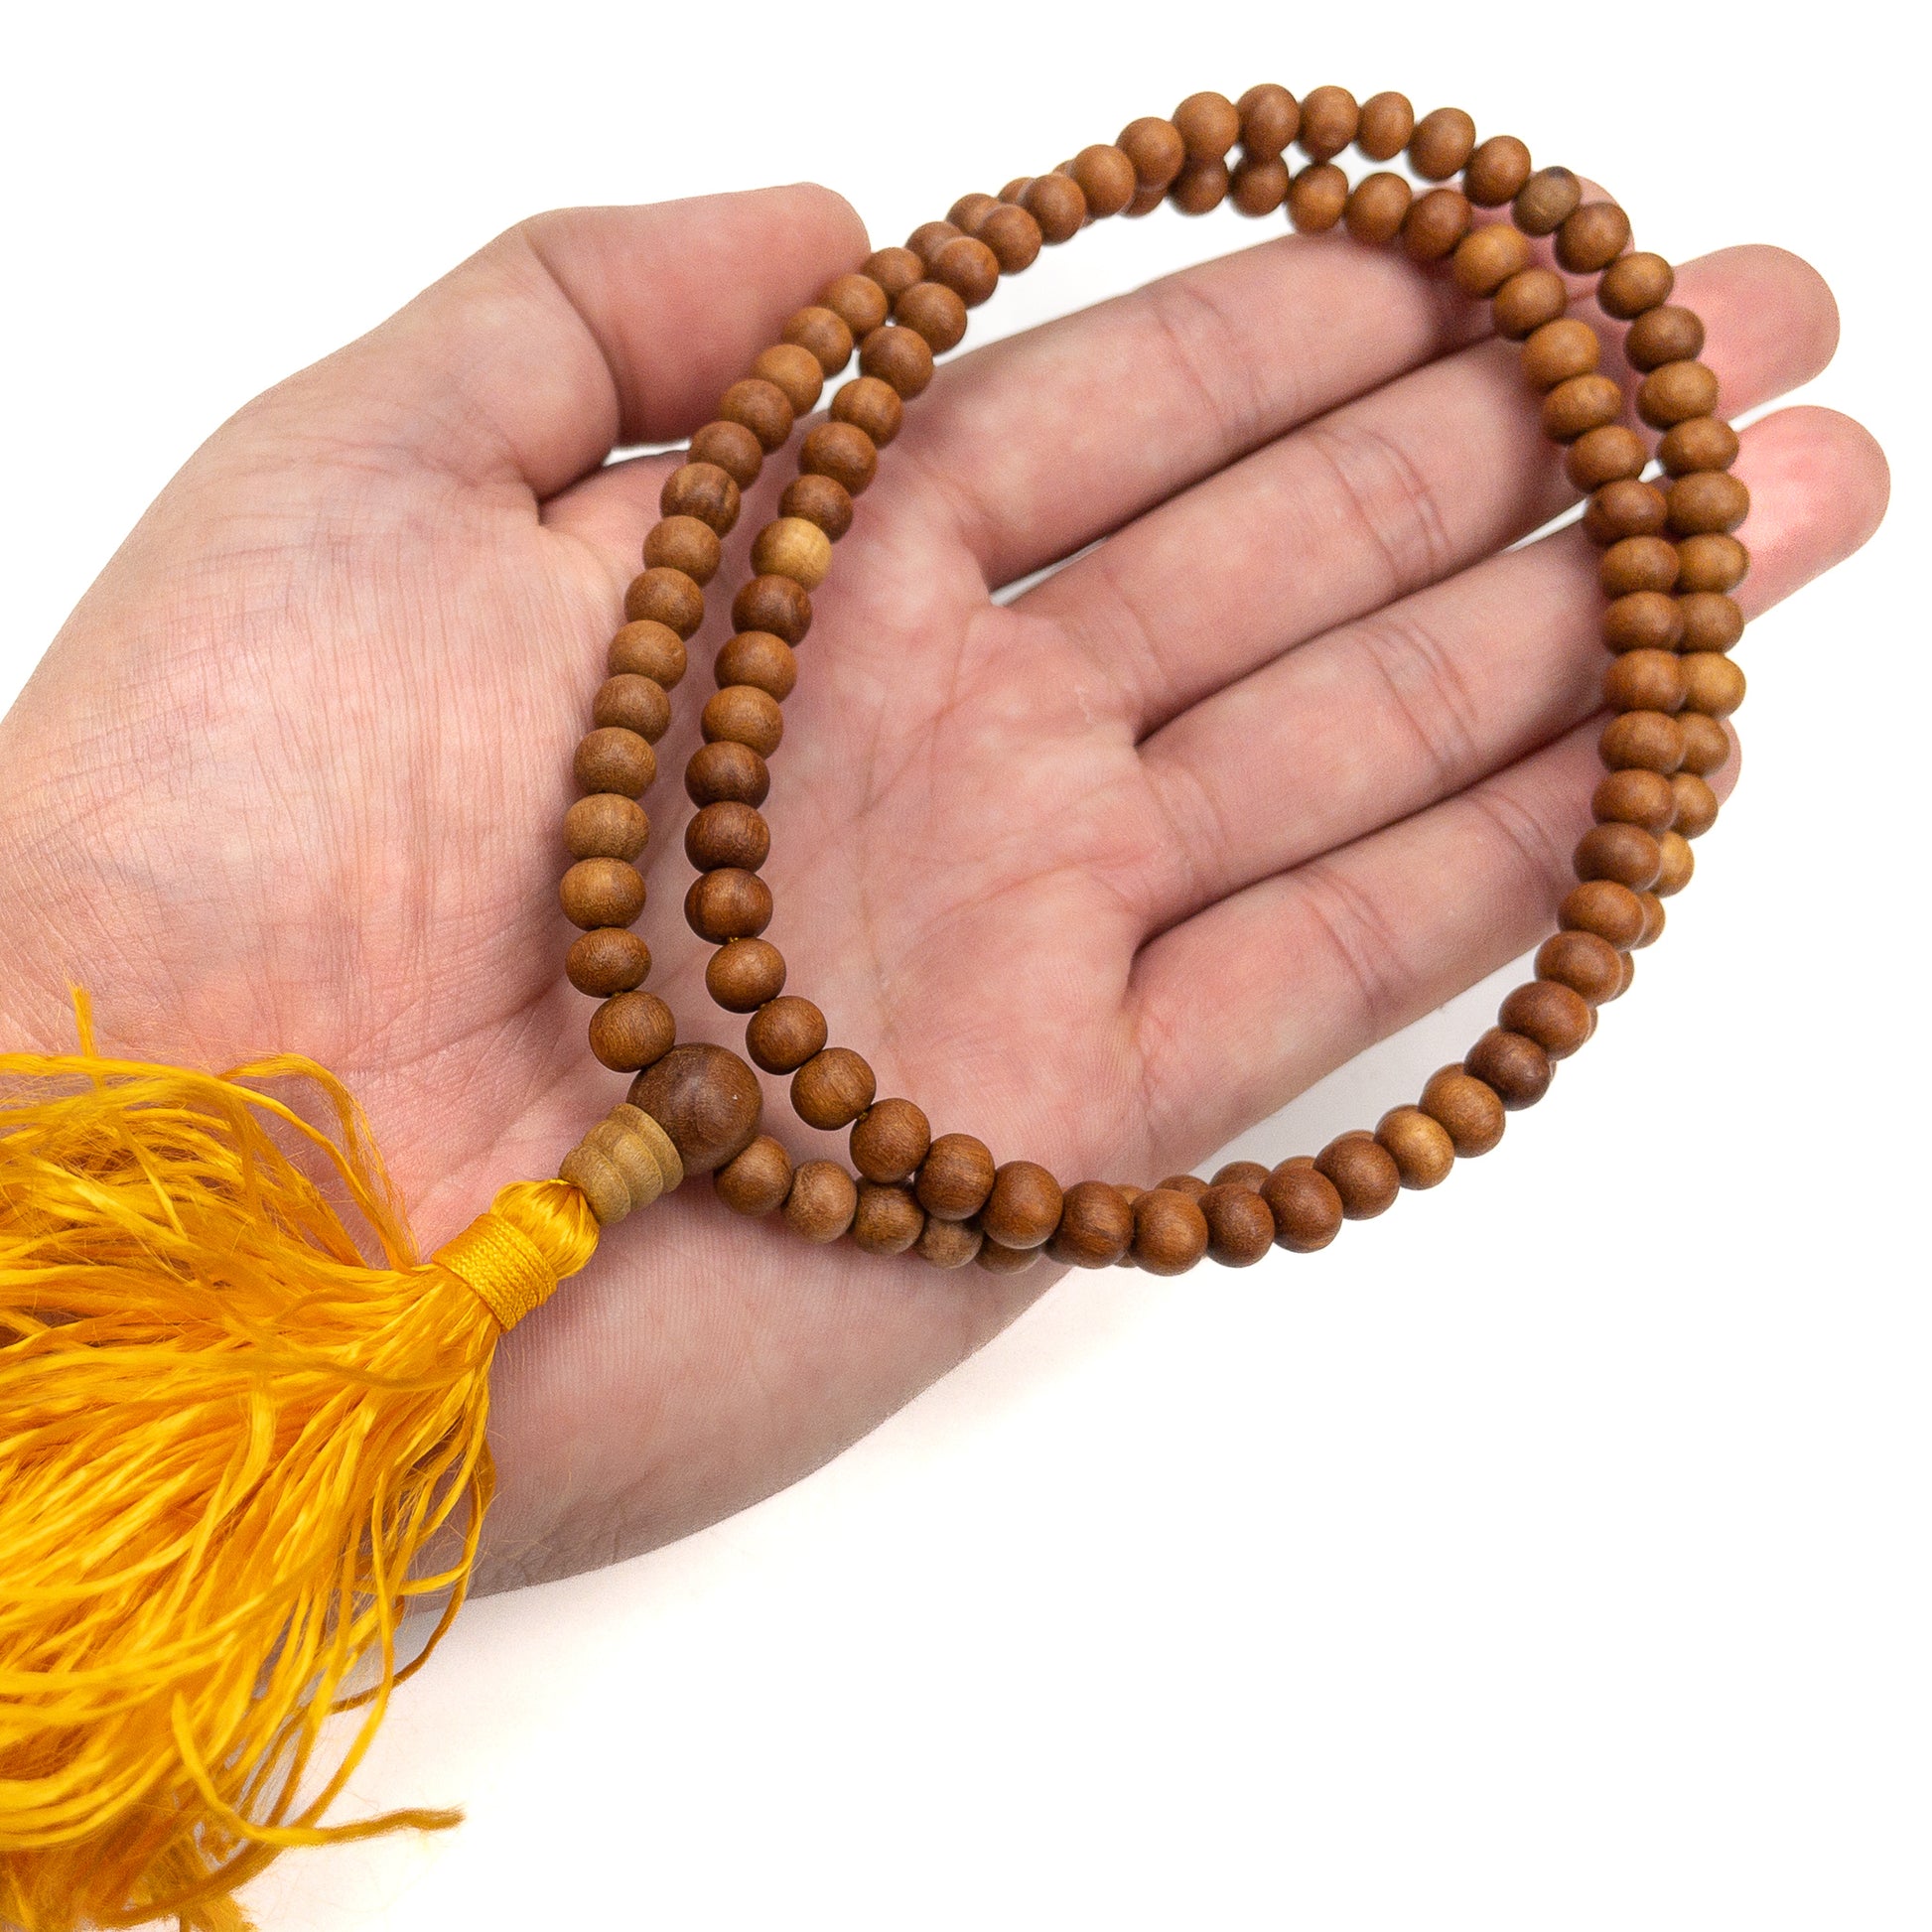 Sandalwood 6mm Round Bead (2 Quantities Available)